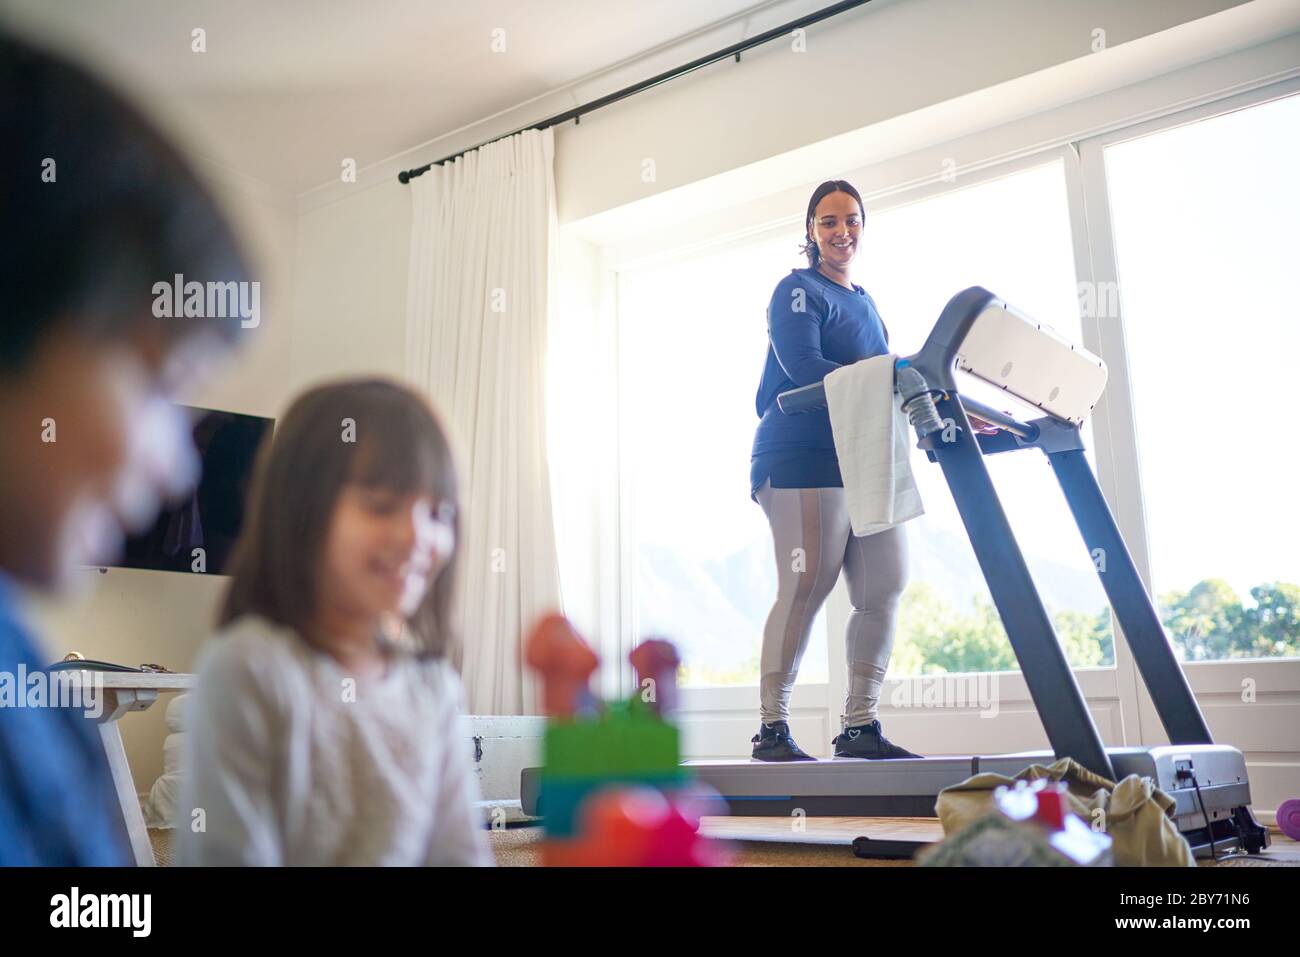 Mother exercising on treadmill and watching kids play Stock Photo